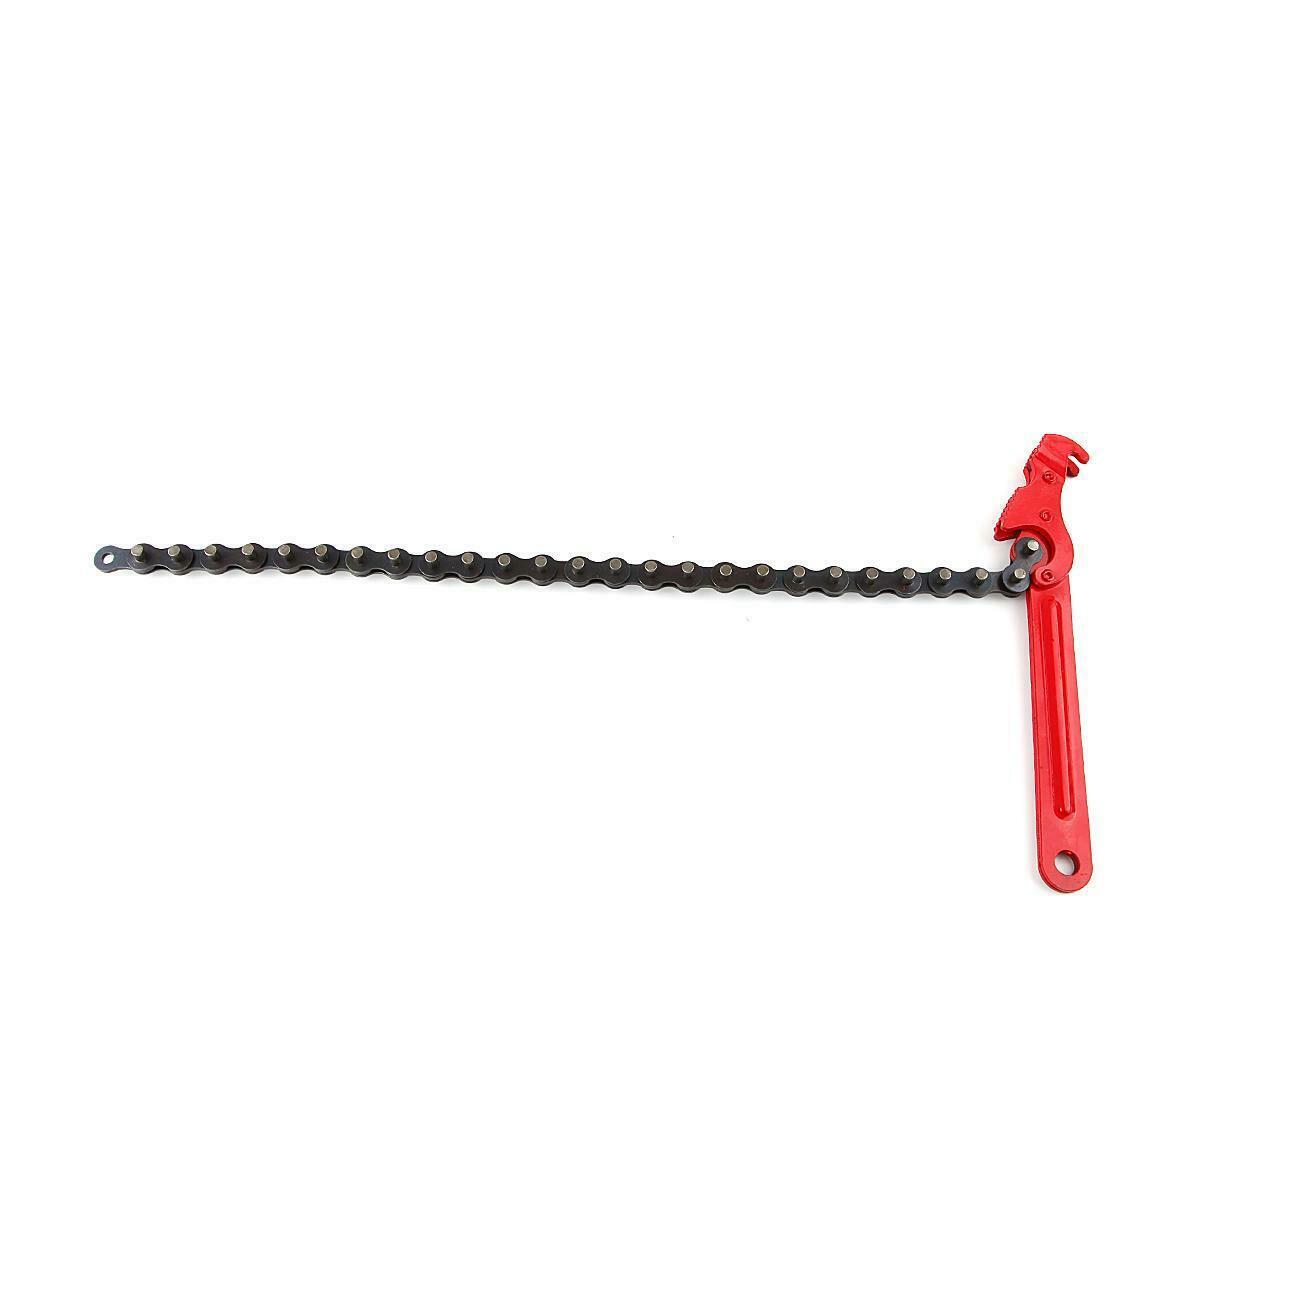 Multi-Purpose Oil Fuel Filter Canister Chain Strap Opener Wrench Remover Tool 16 inch (420mm) Adjustable Chain and 8 inch (215mm) Steel Handle Grip